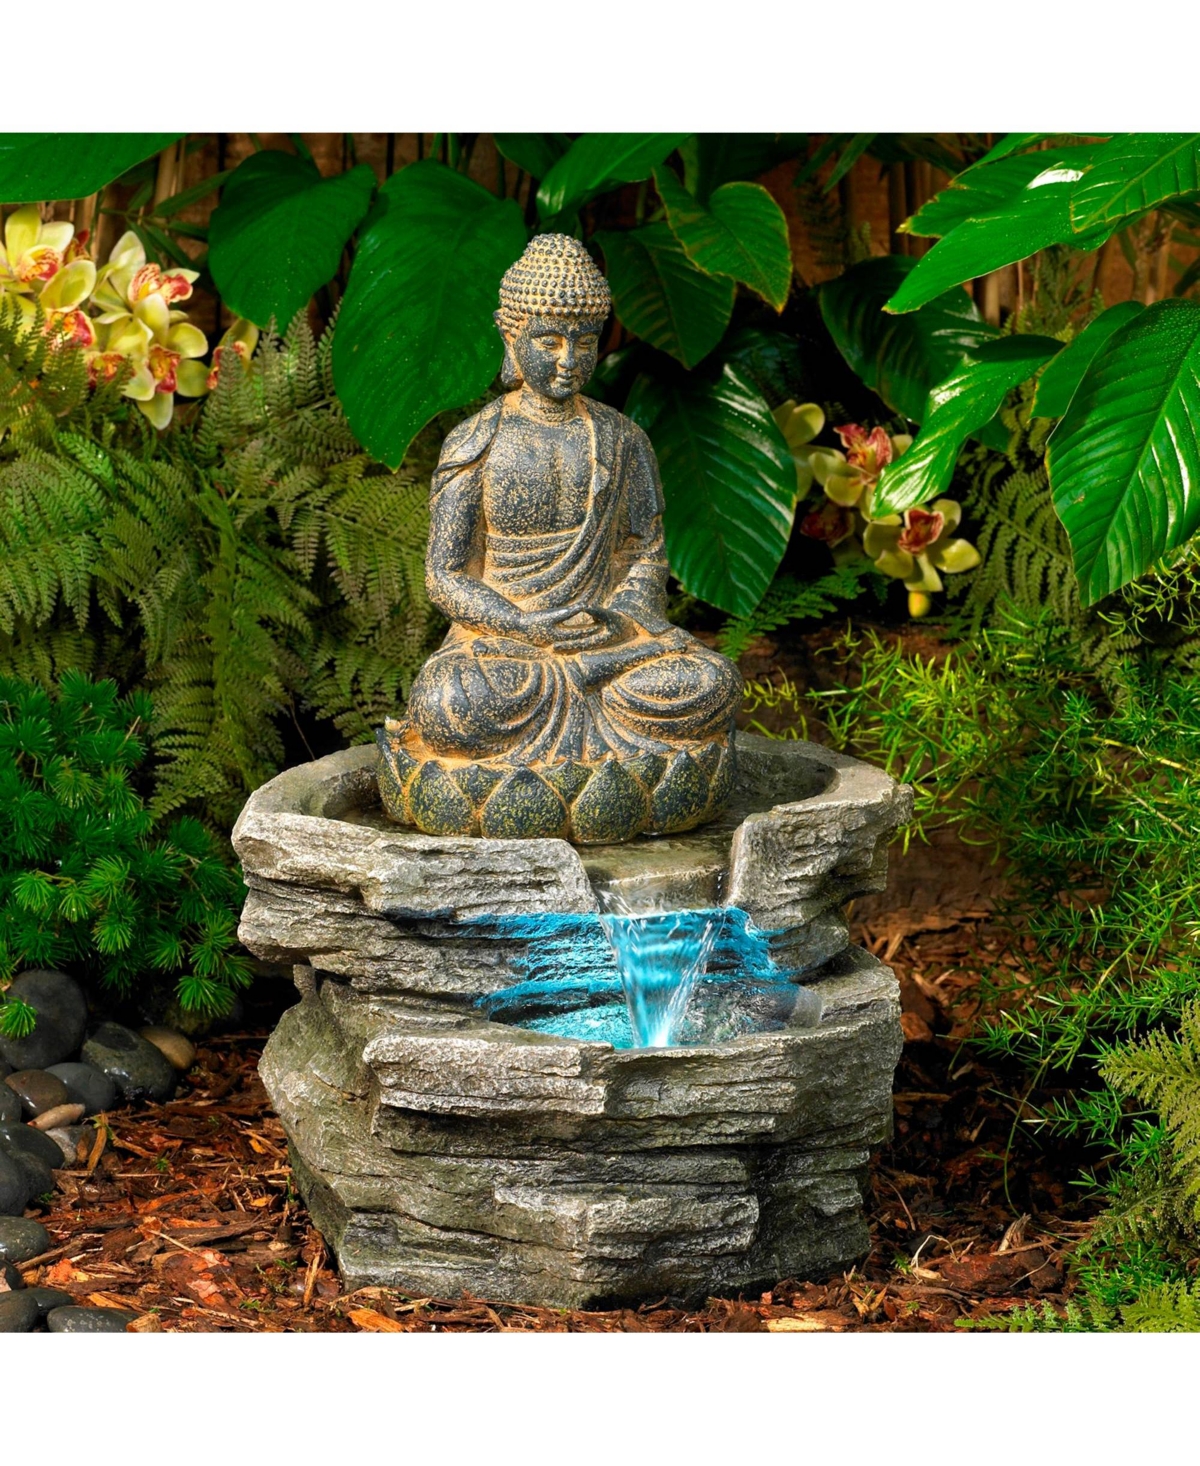 Sitting Buddha Rustic Zen Outdoor Floor Water Fountain 21" High with Led Light Meditation Decor for Garden Patio Backyard Deck Home Lawn Porch House R